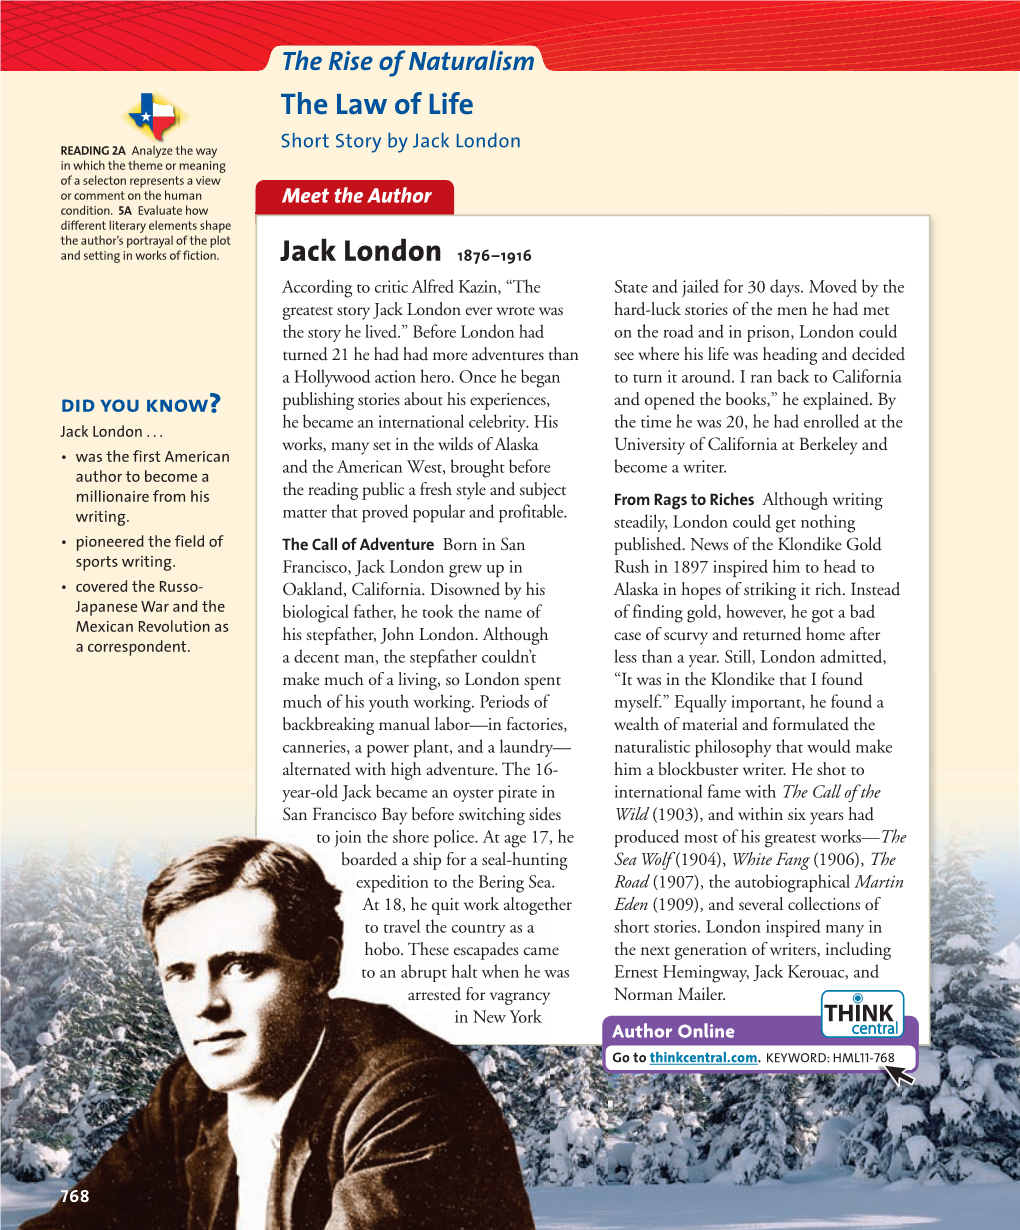 The Law of Life Jack London 1876–1916